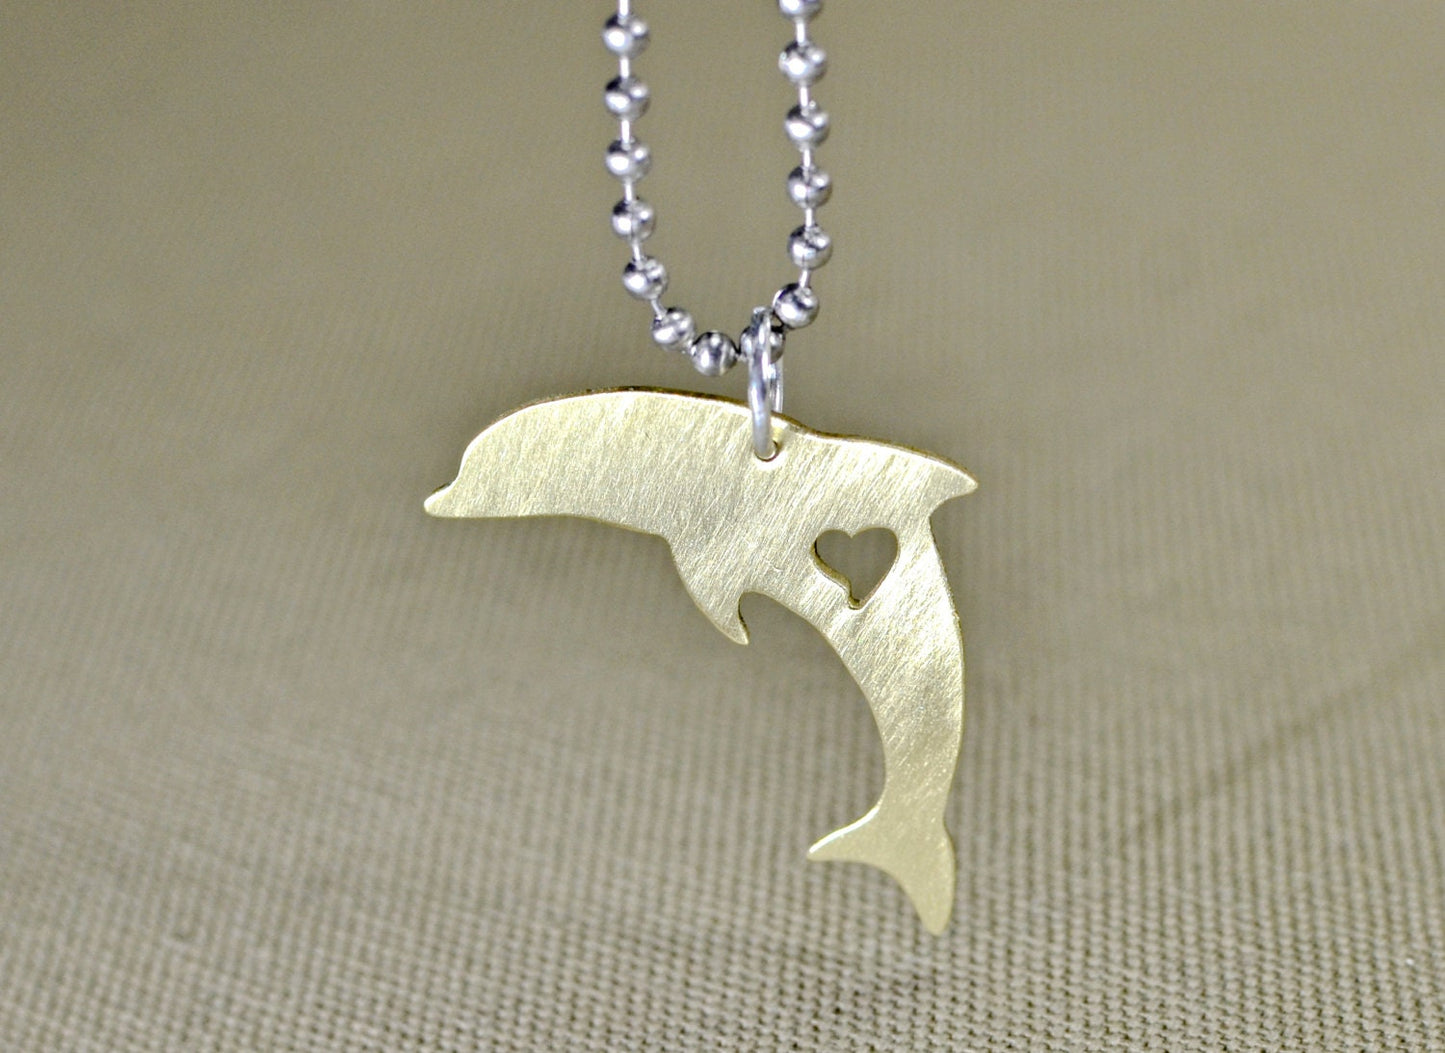 Dolphin necklace in various metals